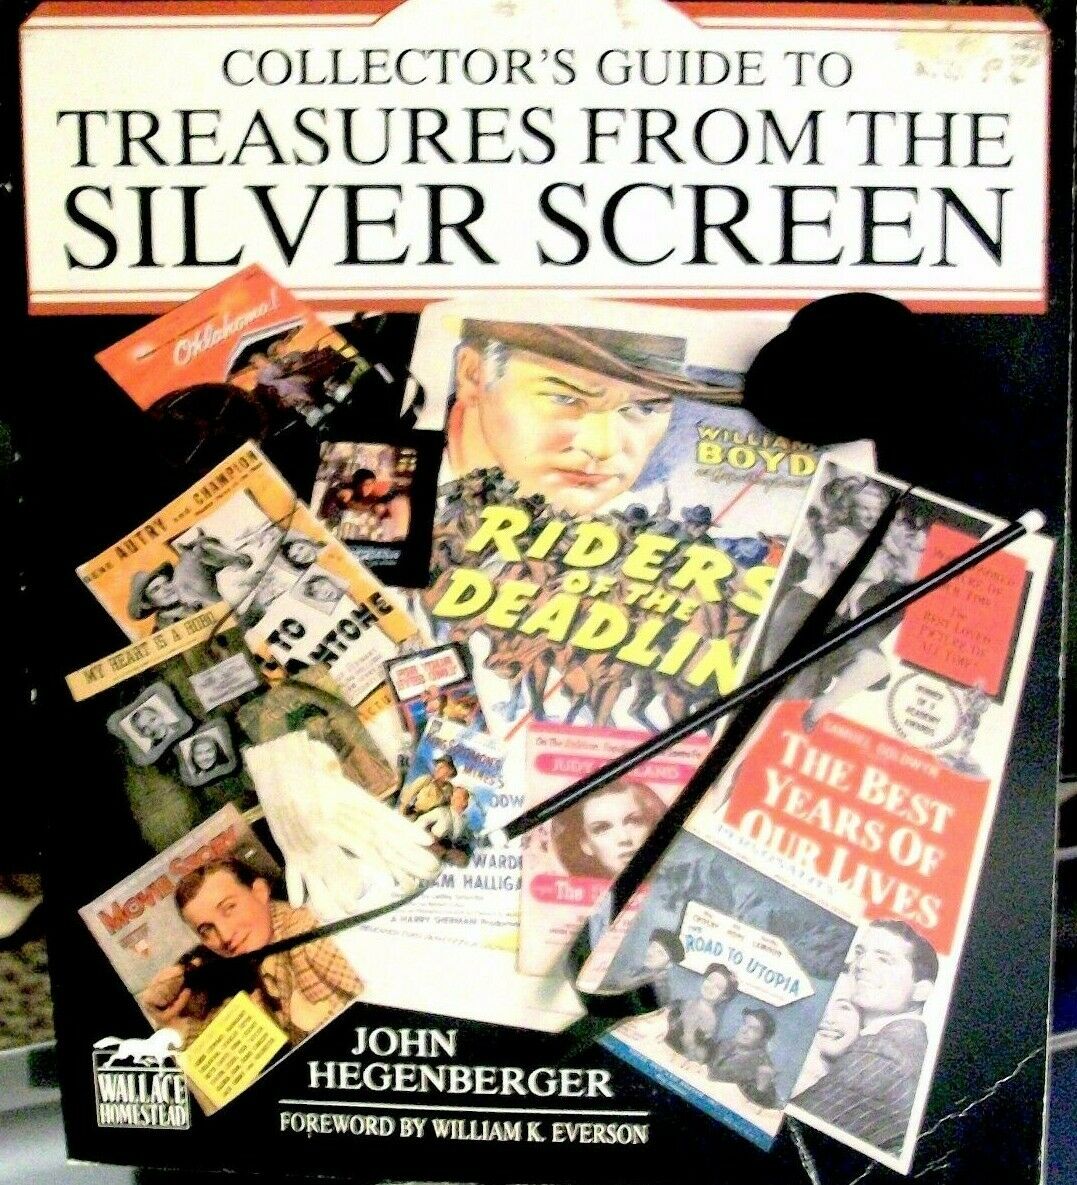 Book On Movie Collectibles Treasures From The Silver Screen By John Hegenberger